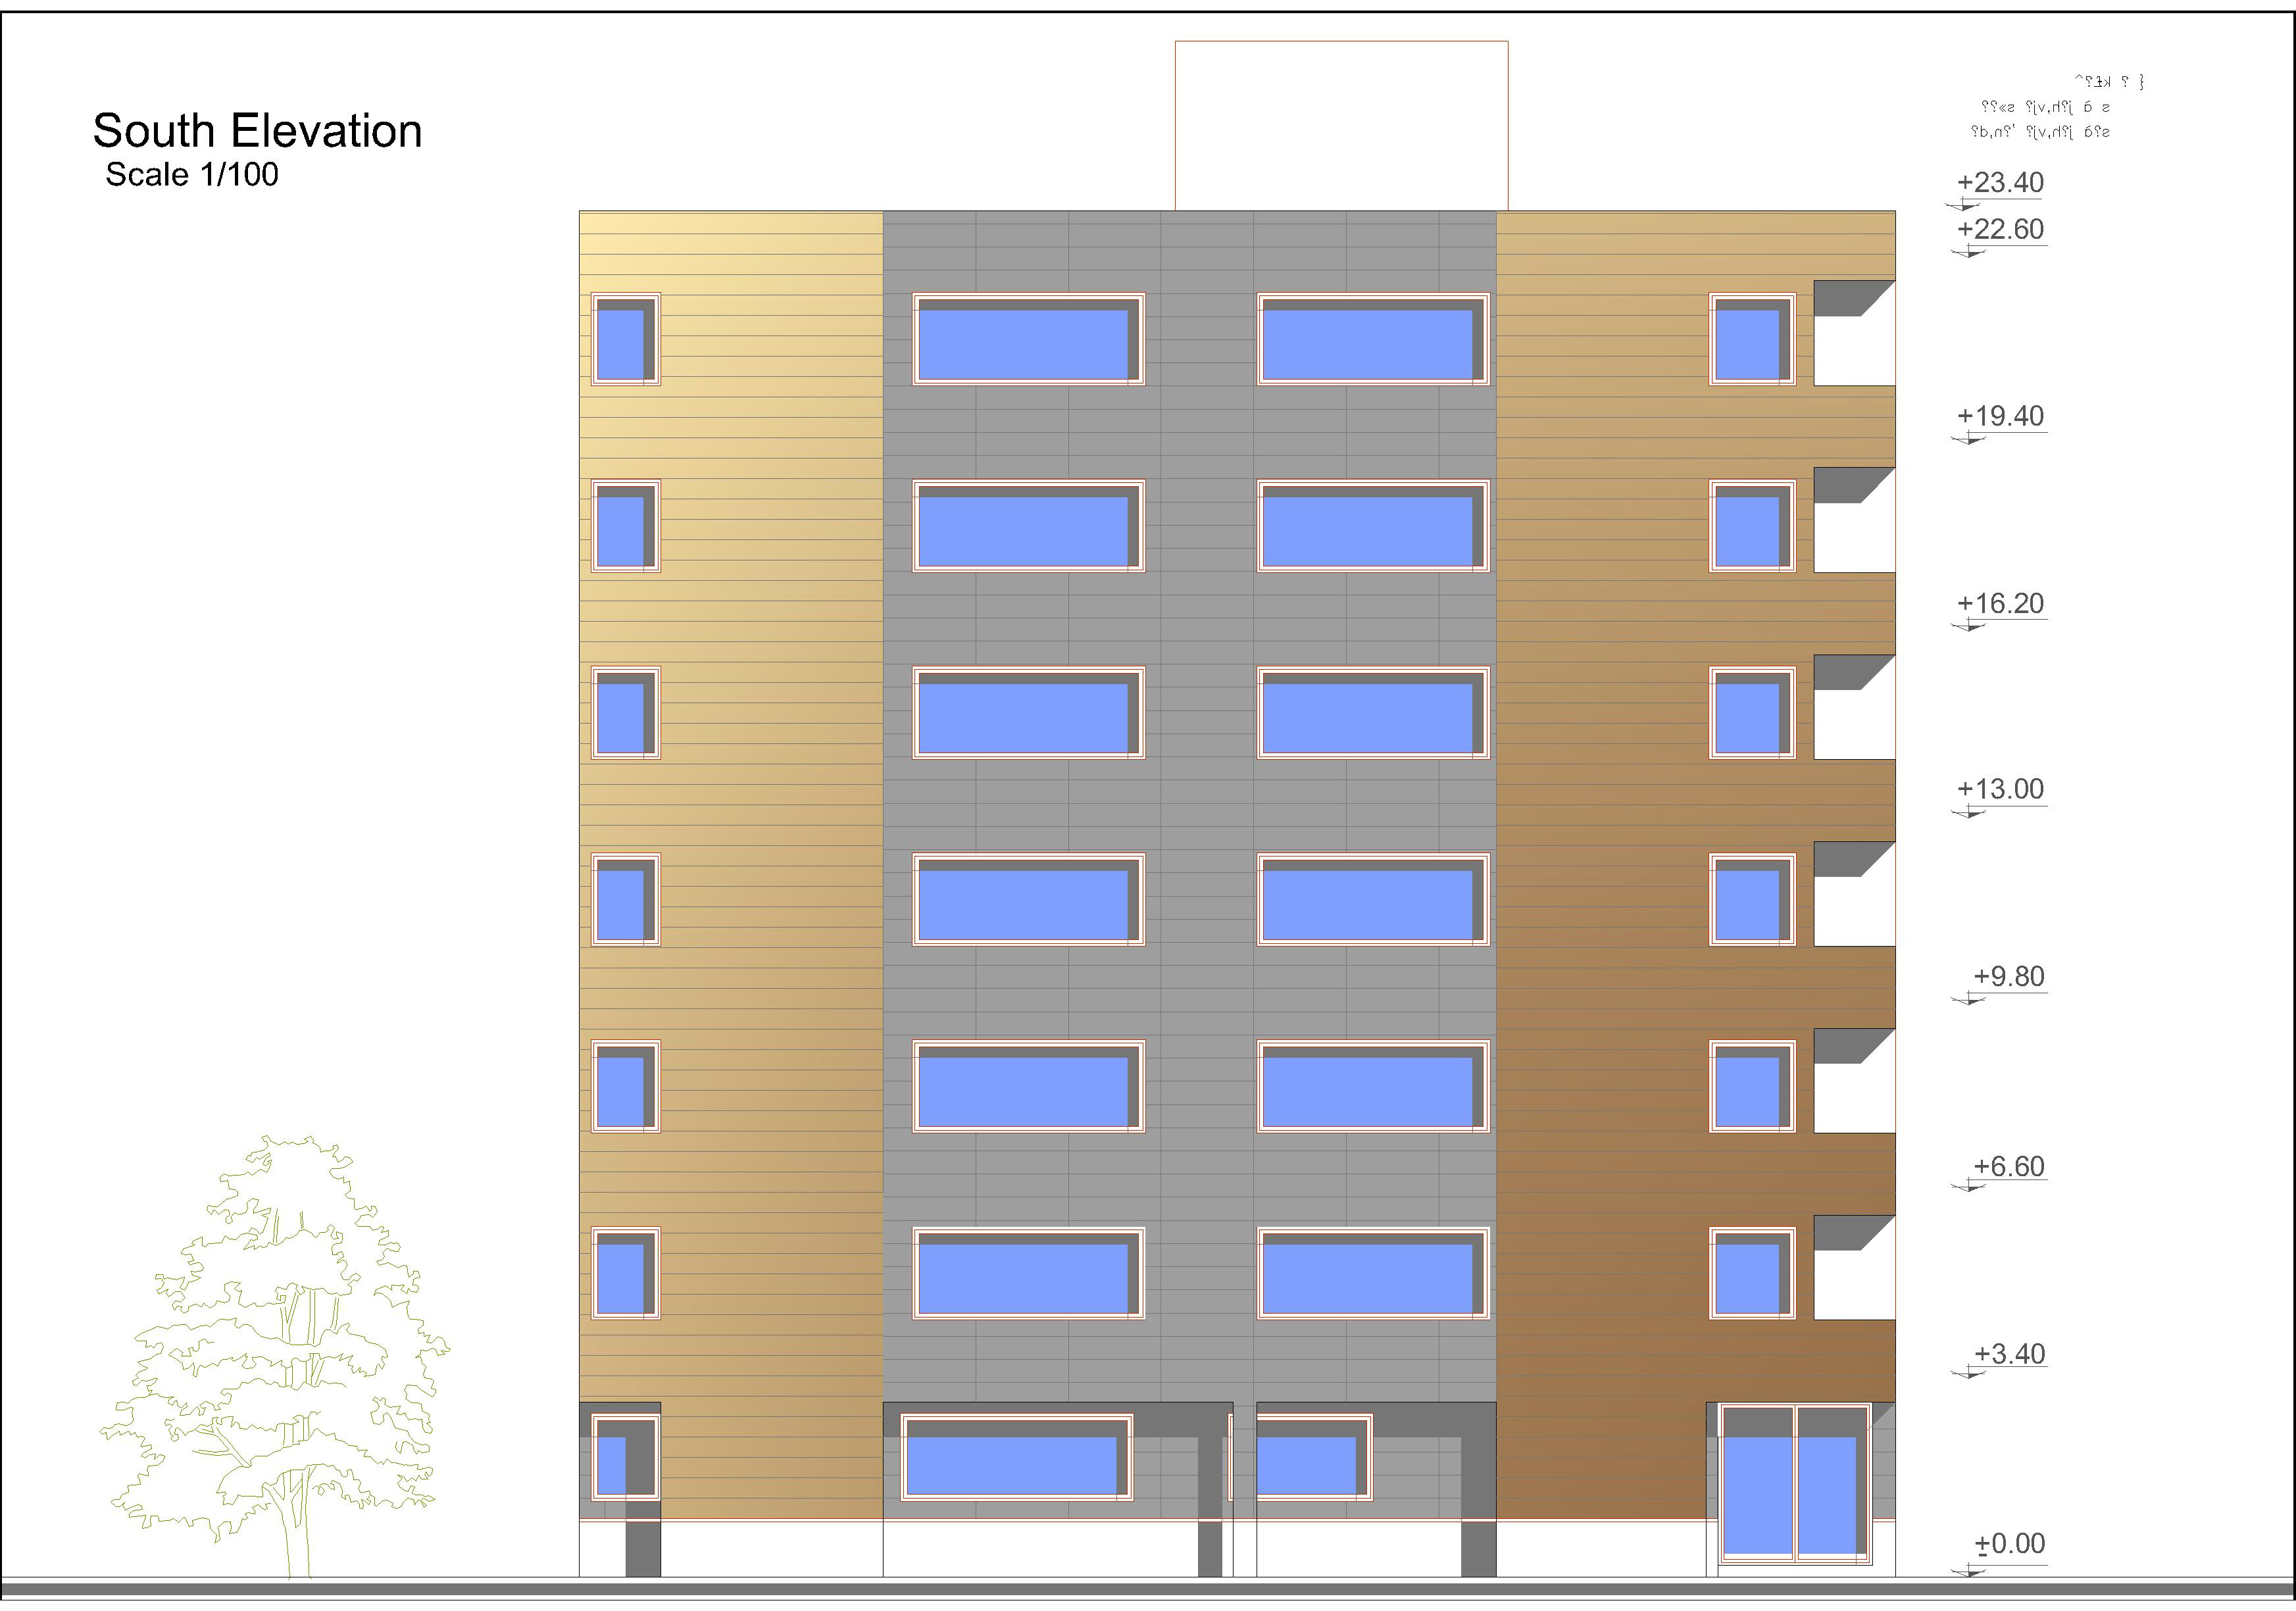 Red line shows the southward-facing façades of this flat where shading panels will be added.